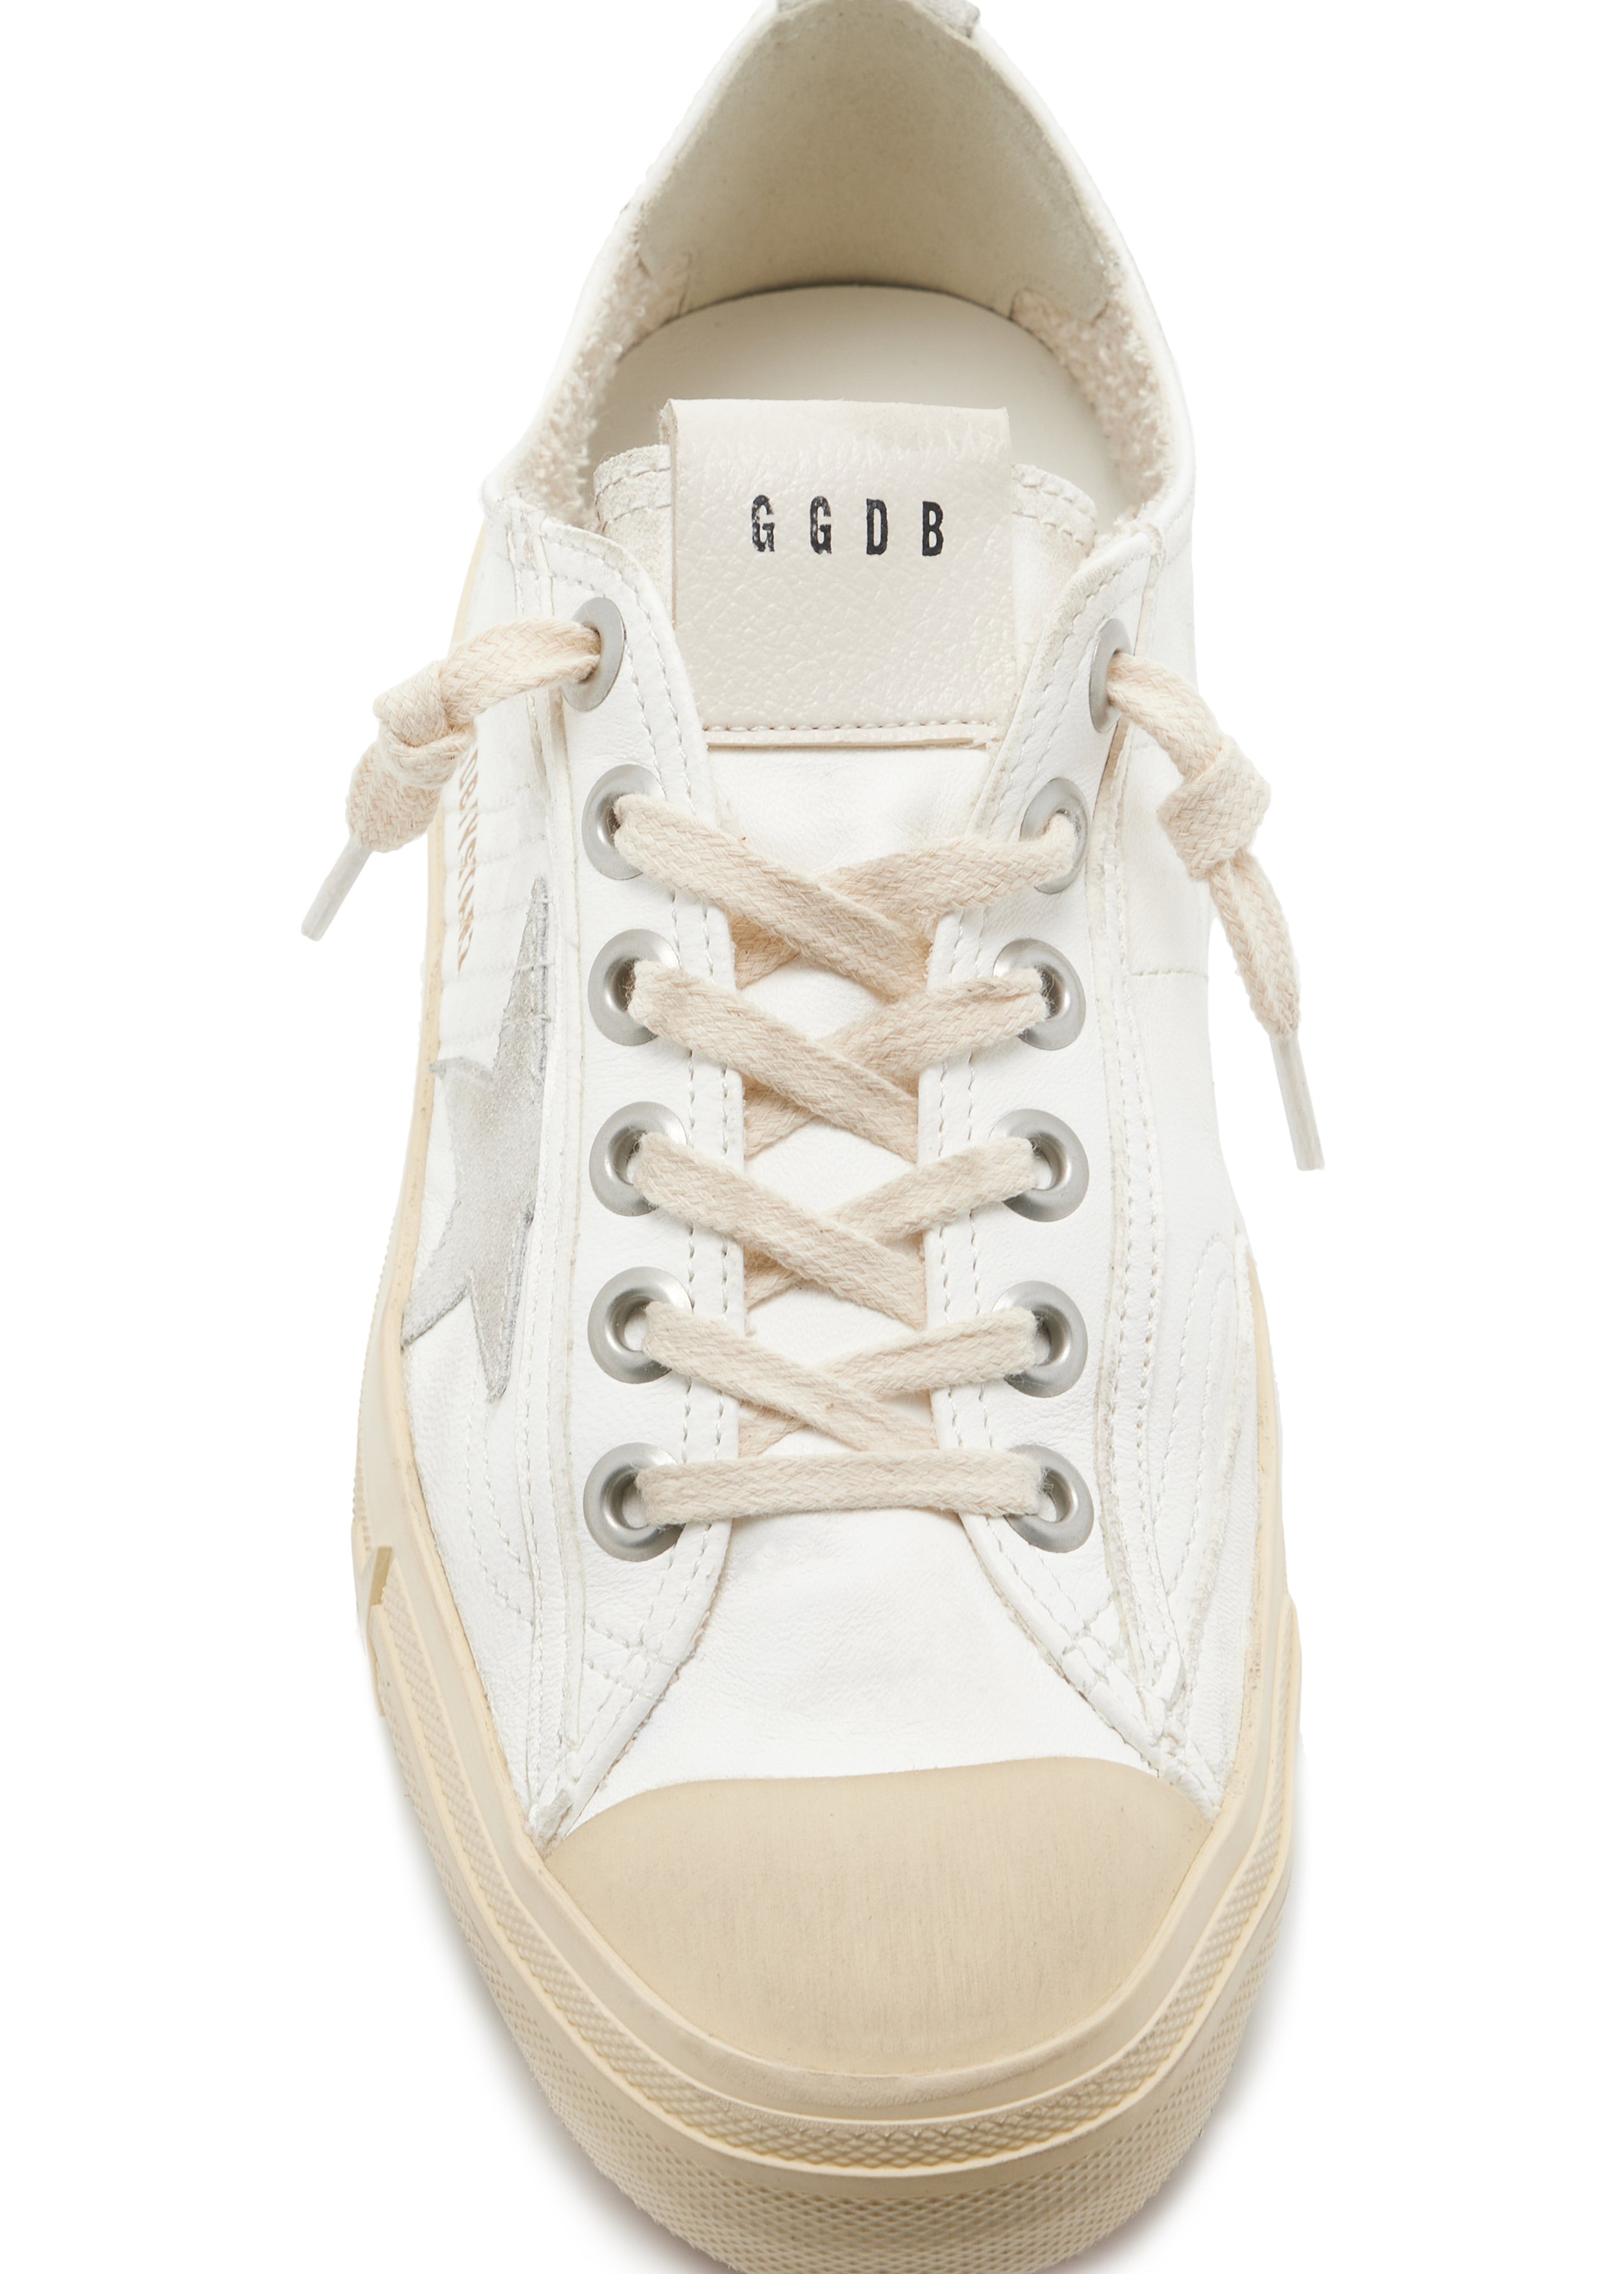 golden-goose-white-v-star-2-nappa-upper-rubber-toe-suede-star-and-list_6559d079-3a41-4590-b4dd-d9251ecedcb2.jpg